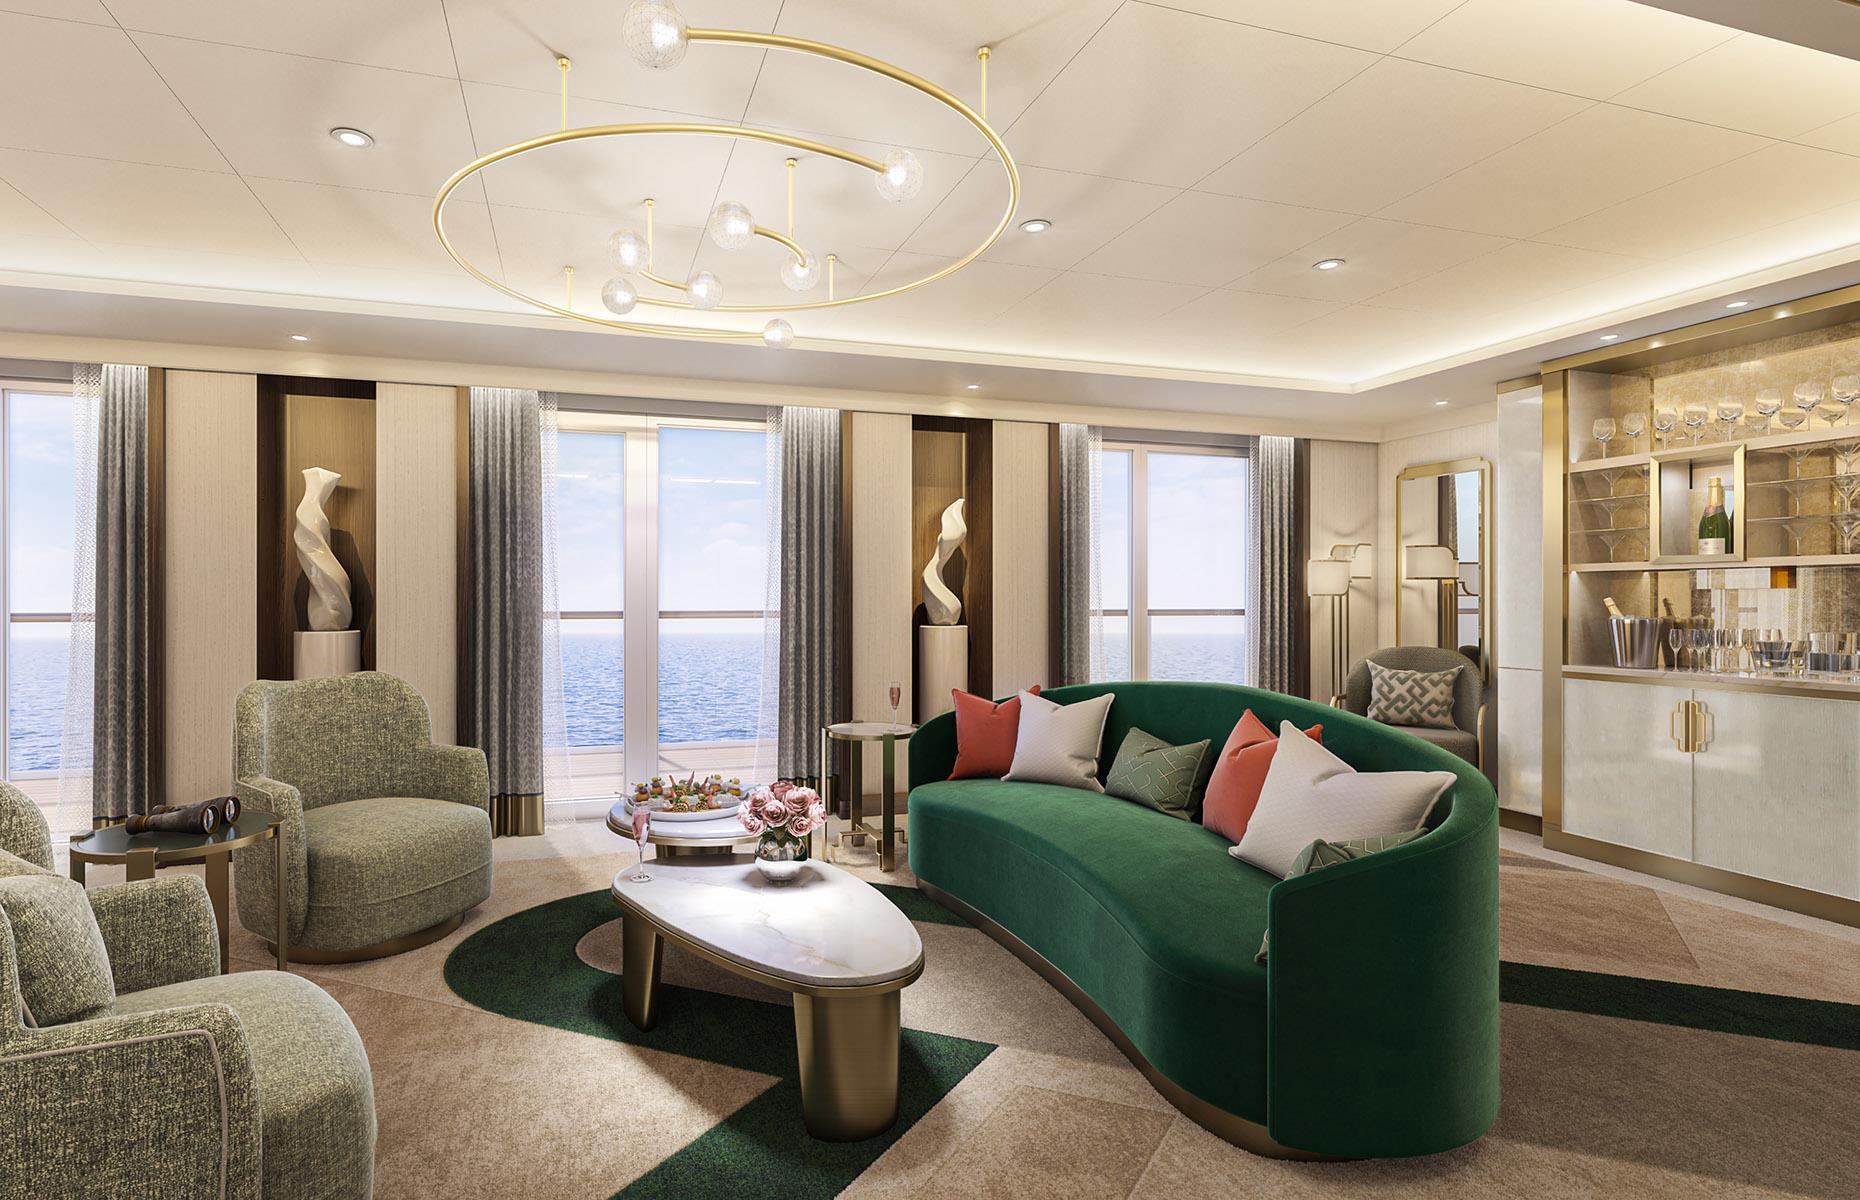 <p>Fine dining, world class spas and cocktails on tap – there’s no doubt that cruising is an indulgent and glamorous way to travel, with many modern vessels compared to floating hotels. But some cruise ships take seafaring in style to the next level.</p>  <p><strong>Think personal butlers, complimentary Champagne and private hot tubs, as we tour around the luxurious cruise ship staterooms only the super-rich can afford...</strong></p>  <p>*All prices correct at time of writing.</p>